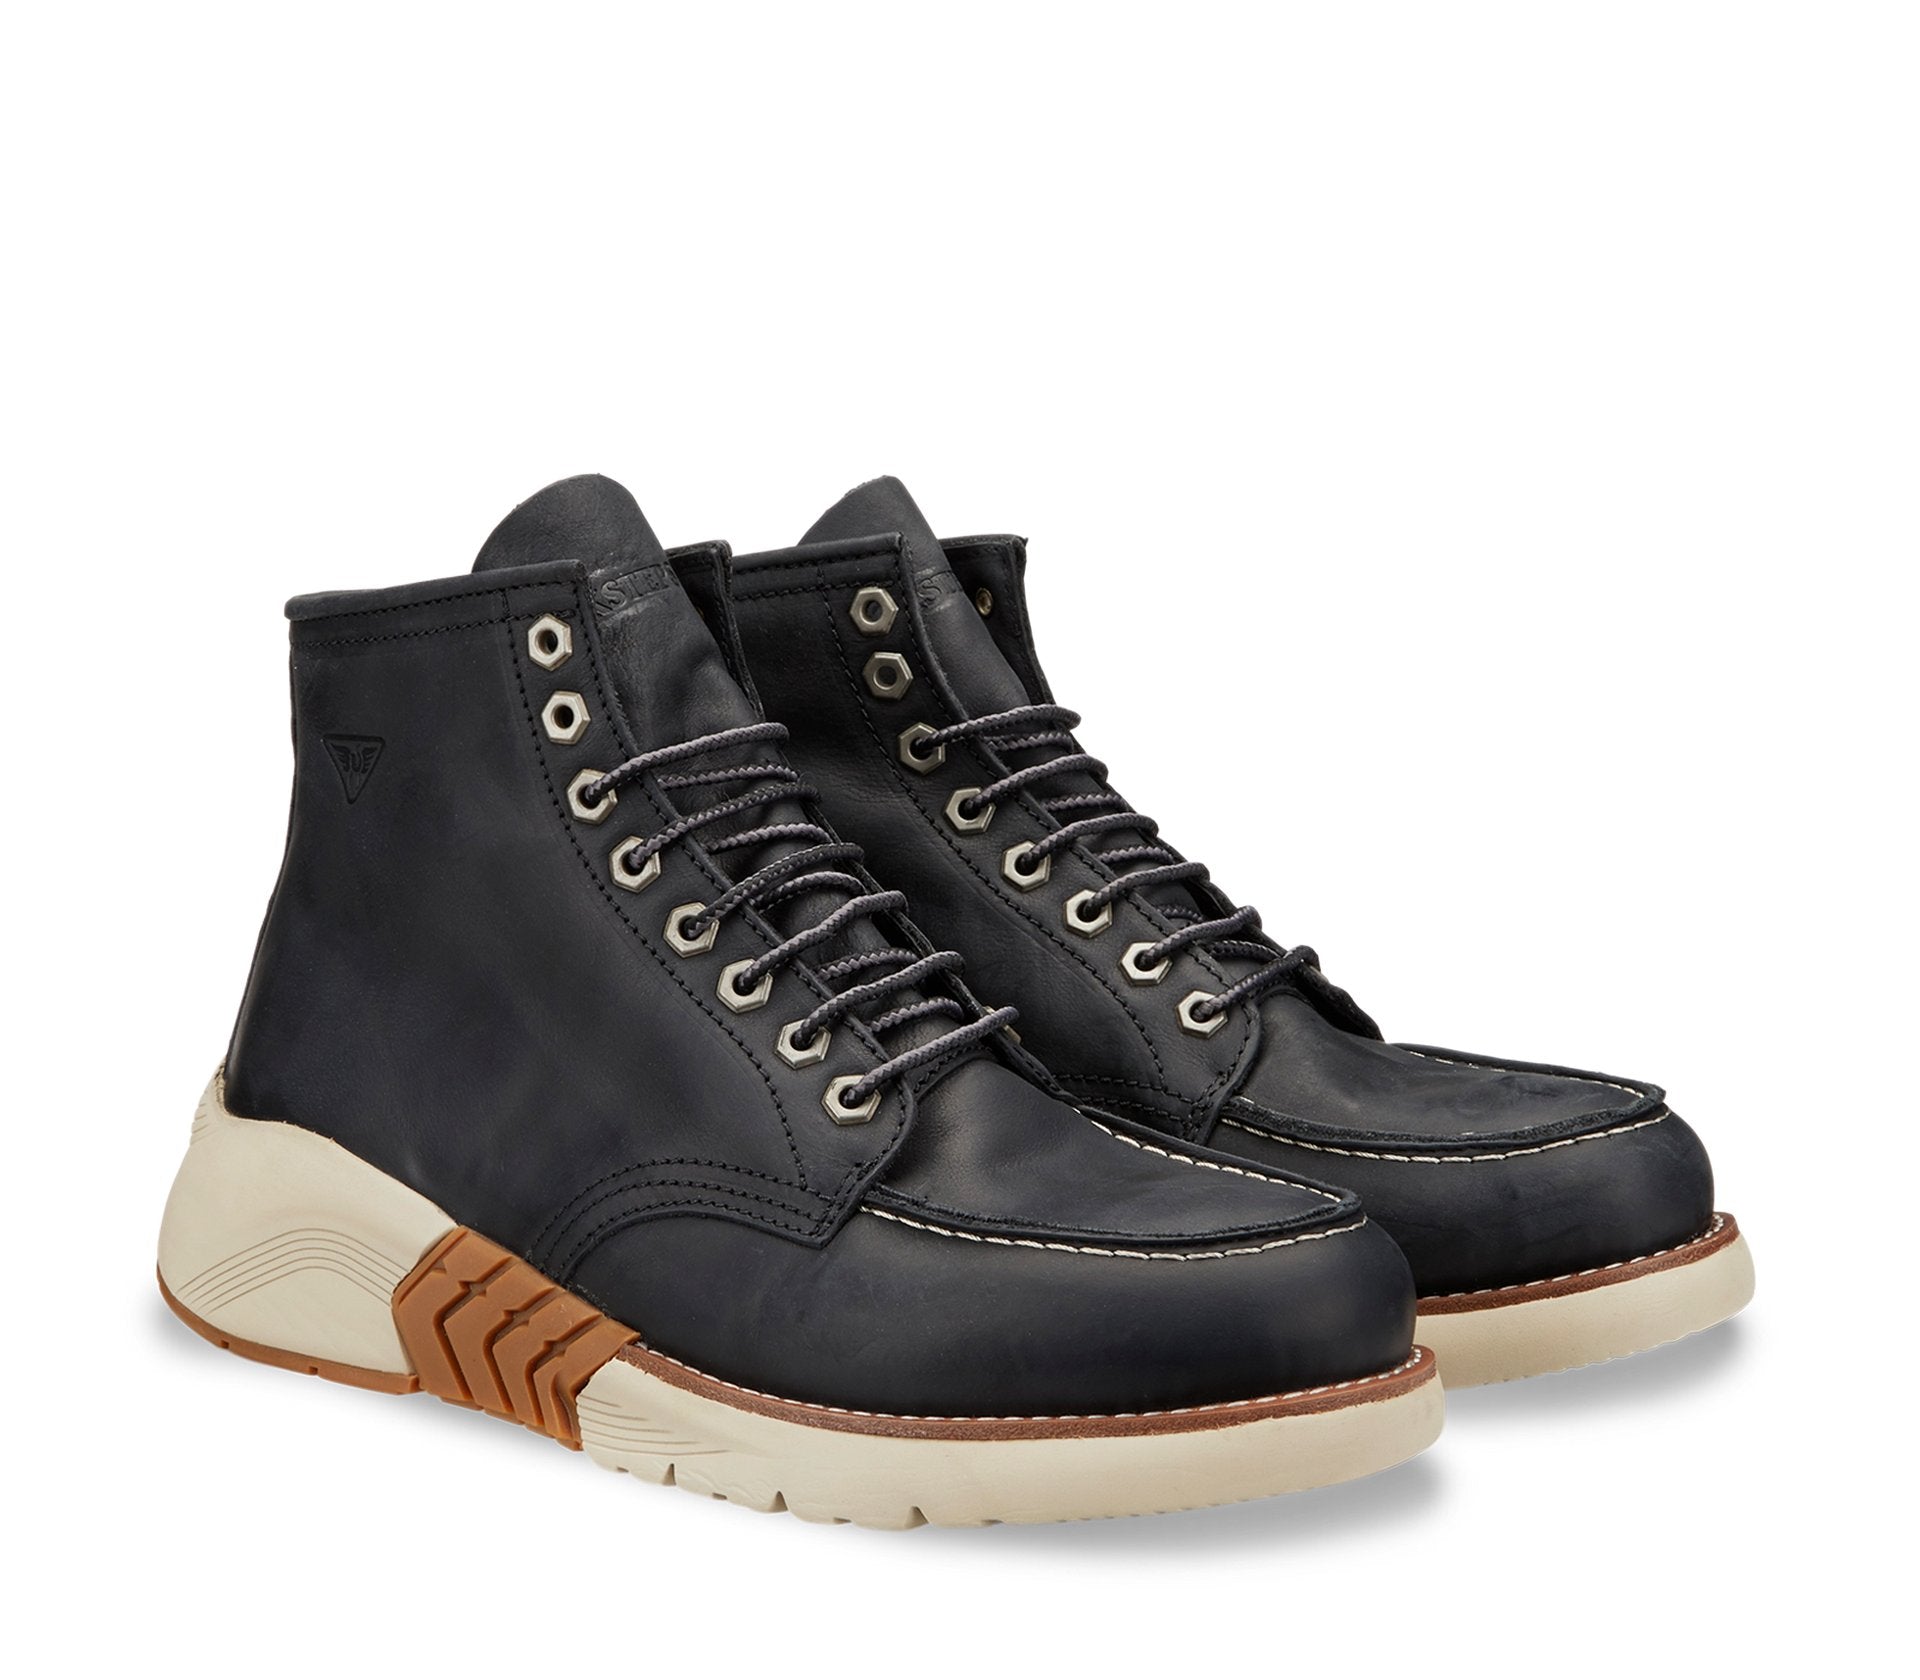 Men's Black Leather Boot with Laces and Sporty Sole 